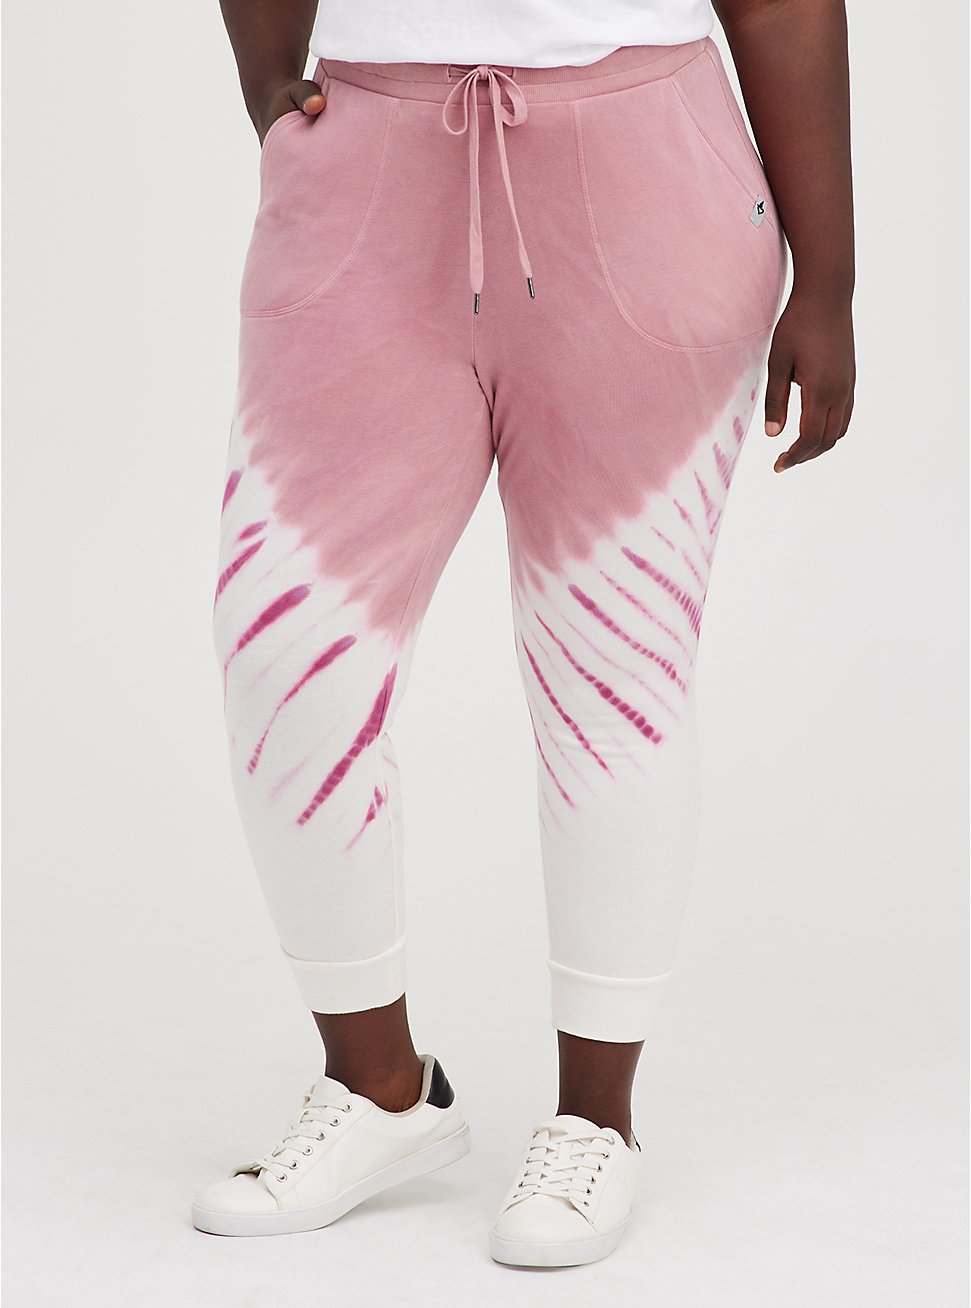 Plus Size Everyday Fleece Crop Active Jogger In Classic Fit, BCA PINK IVORY, hi-res